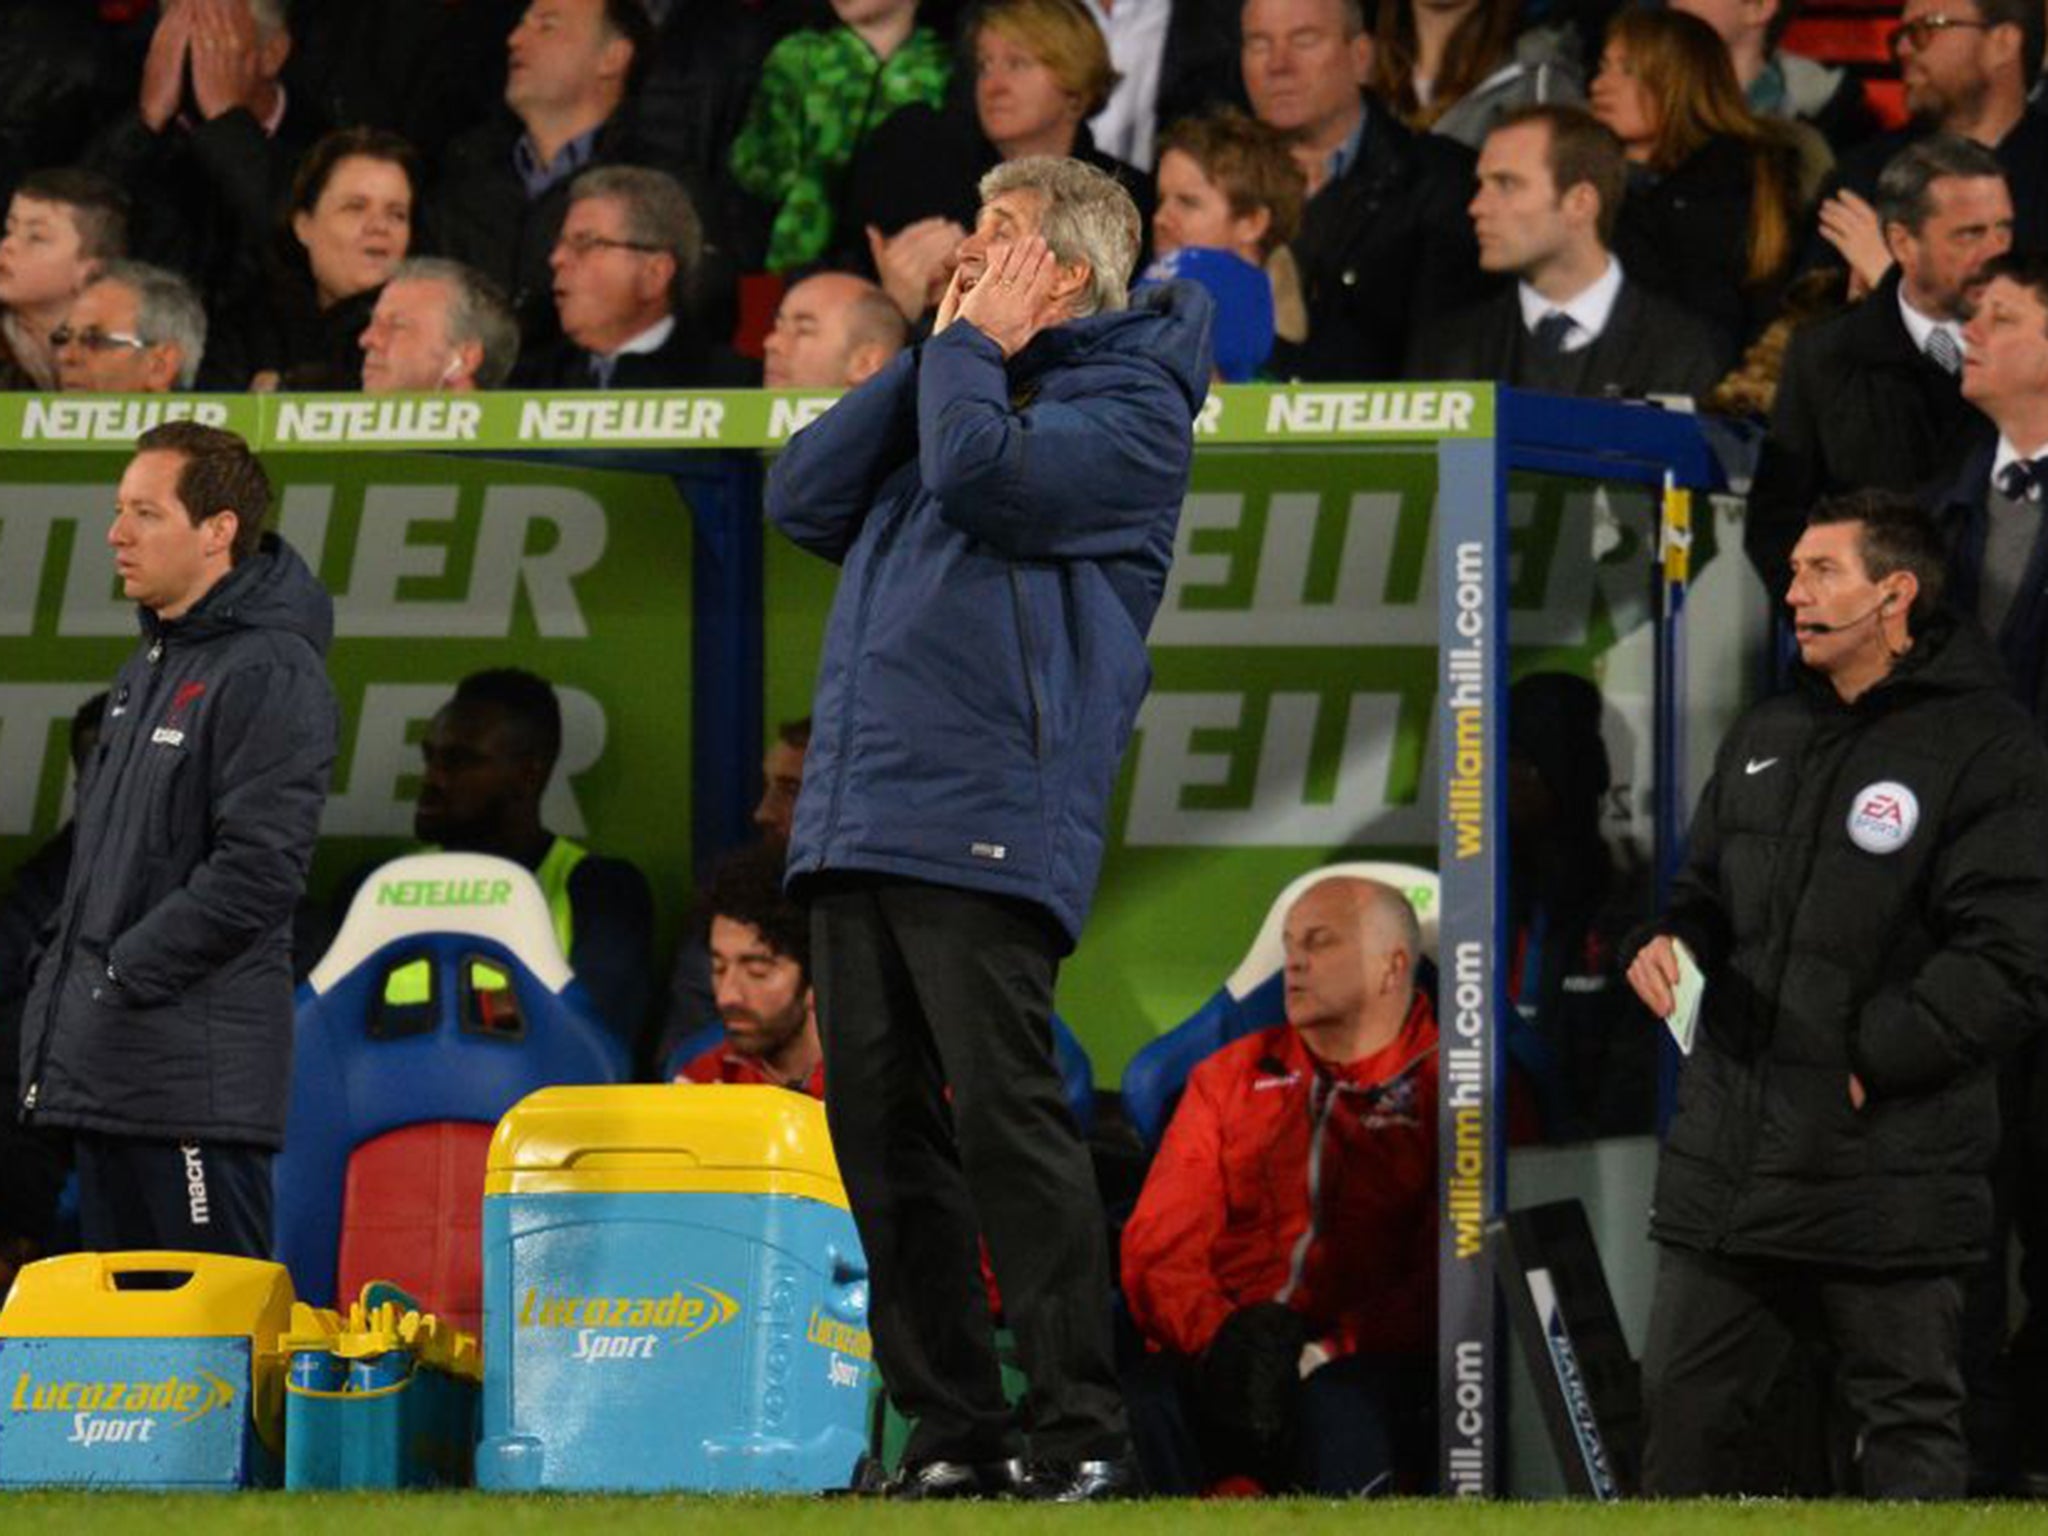 With the loss against Palace, Manuel Pellegrini's title hopes are all but over